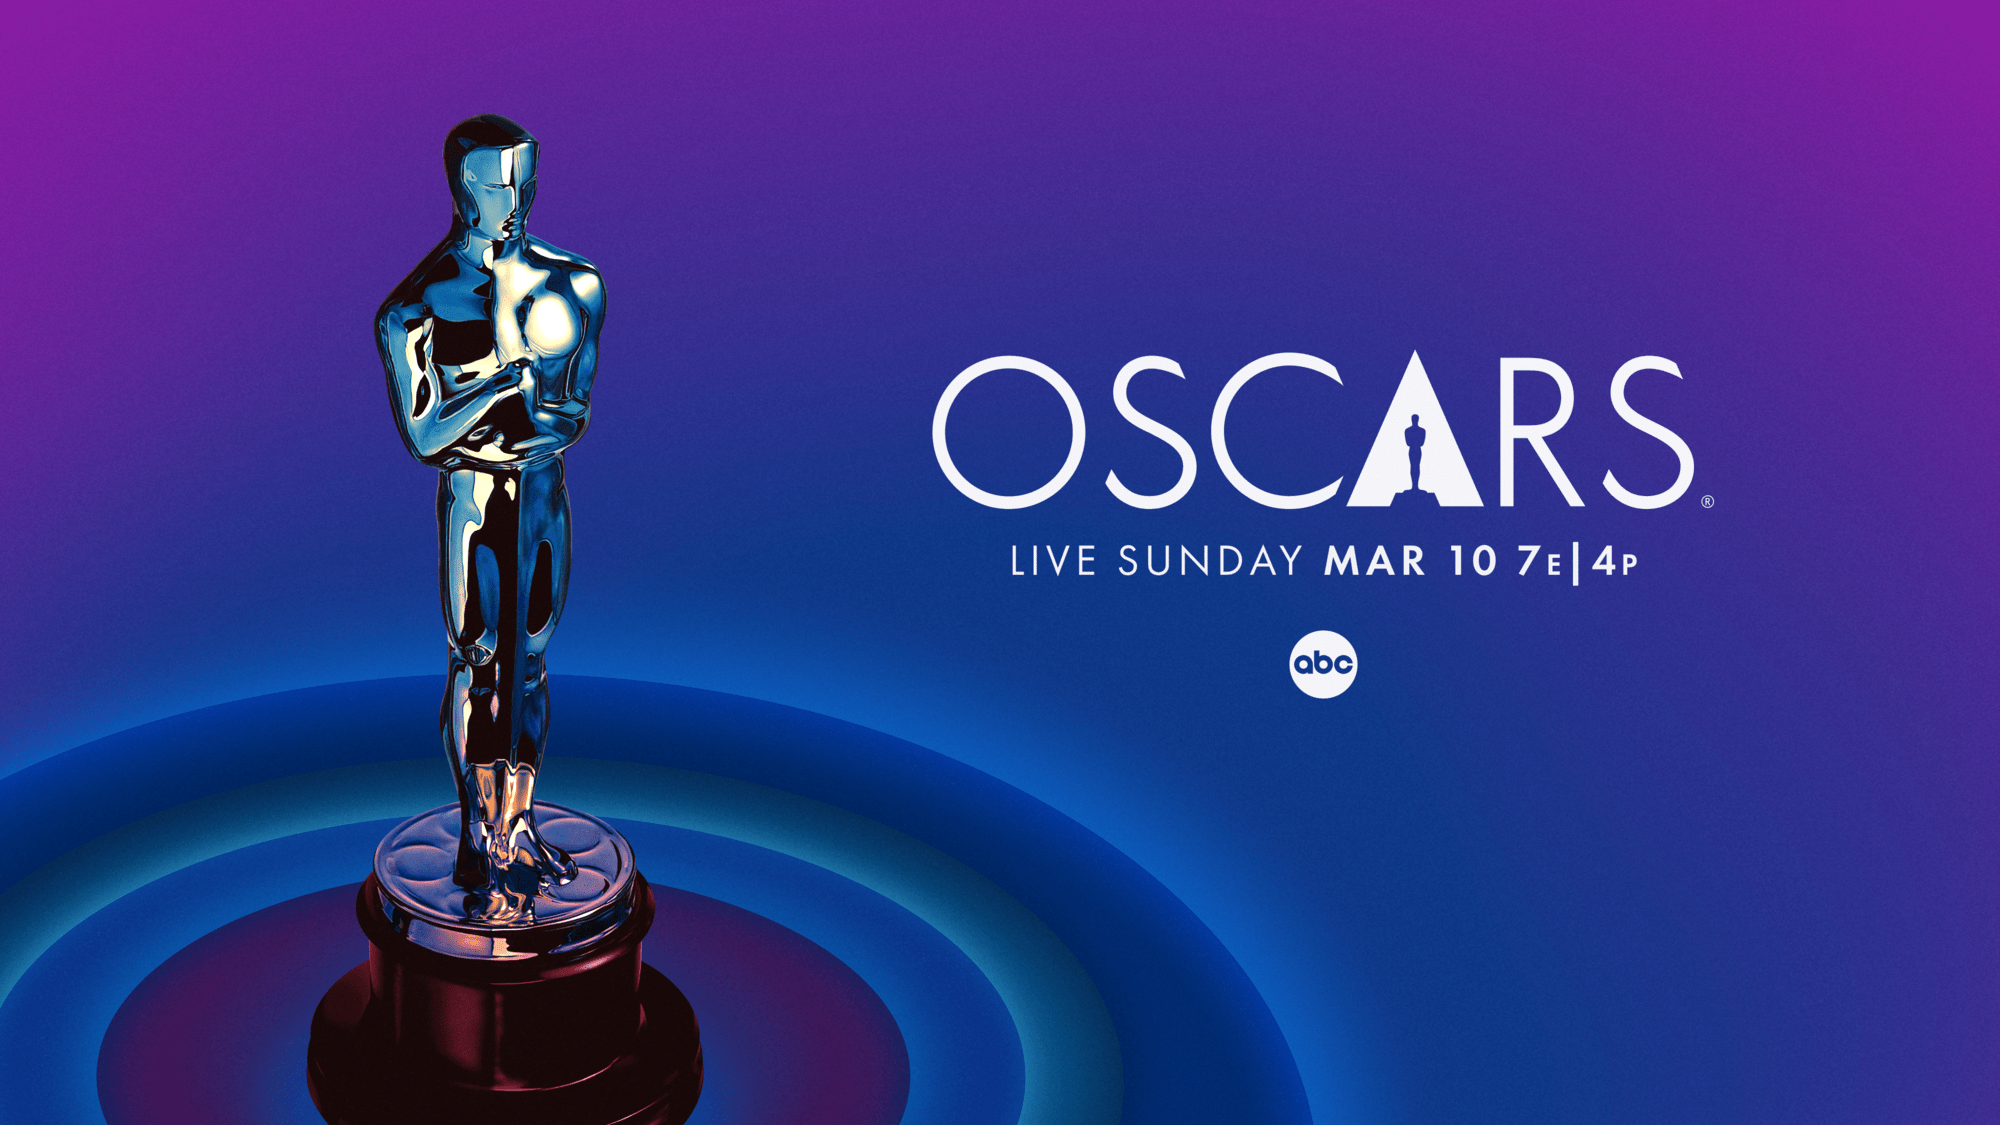 JON BATISTE, BECKY G, BILLIE EILISH AND FINNEAS O’CONNELL, SCOTT GEORGE AND THE OSAGE SINGERS, RYAN GOSLING AND MARK RONSON TO PERFORM NOMINATED ORIGINAL SONGS ON 96TH OSCARS®